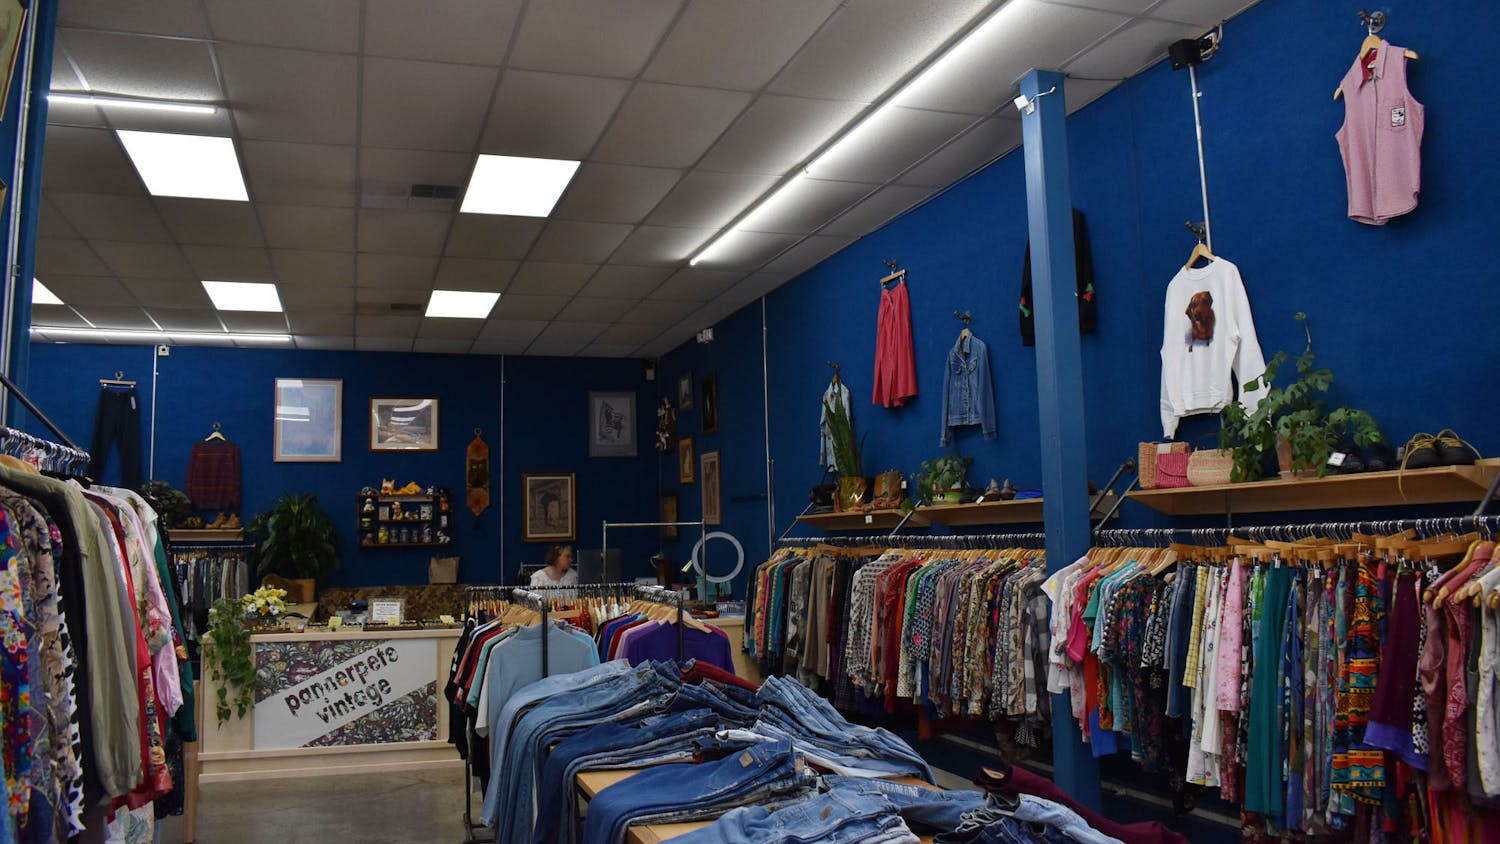 A photo of the clothing racks inside Pannerpete Vintage clothing store in Five Points on March 23, 2023. The store opened on March 12 and sells a collection of vintage clothing.